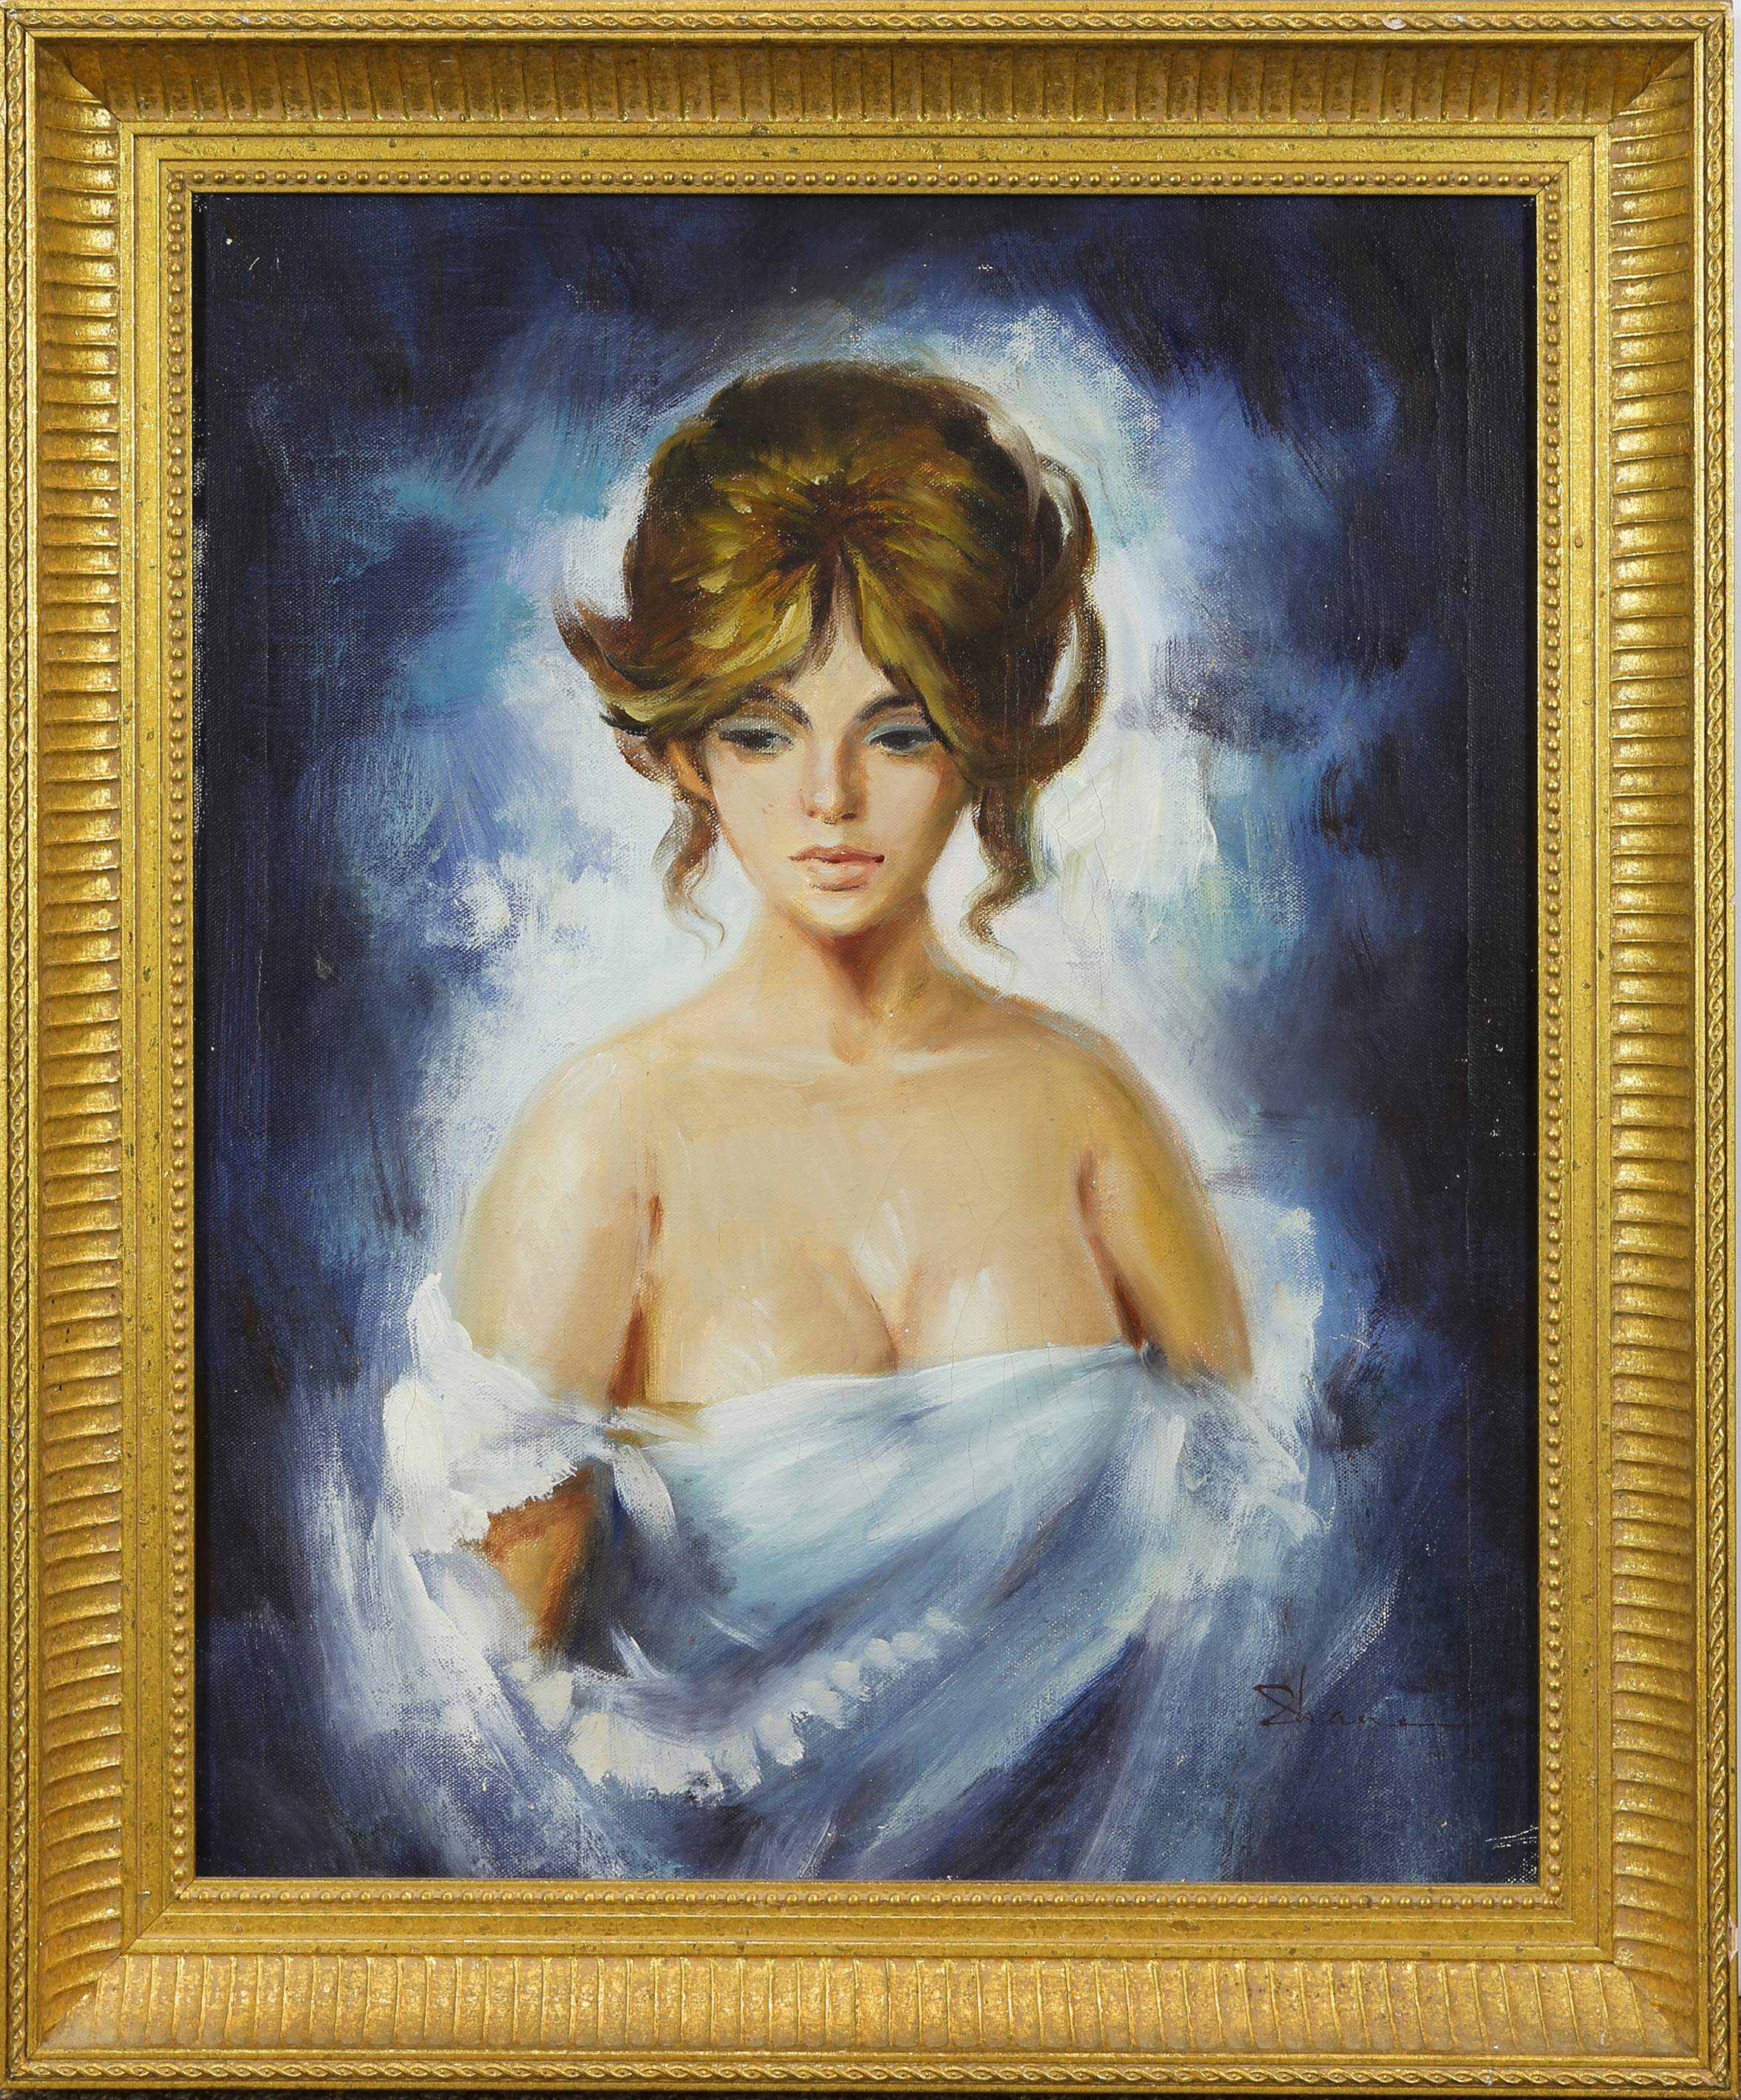 PAINTING PORTRAIT OF A YOUNG WOMAN 3a3593